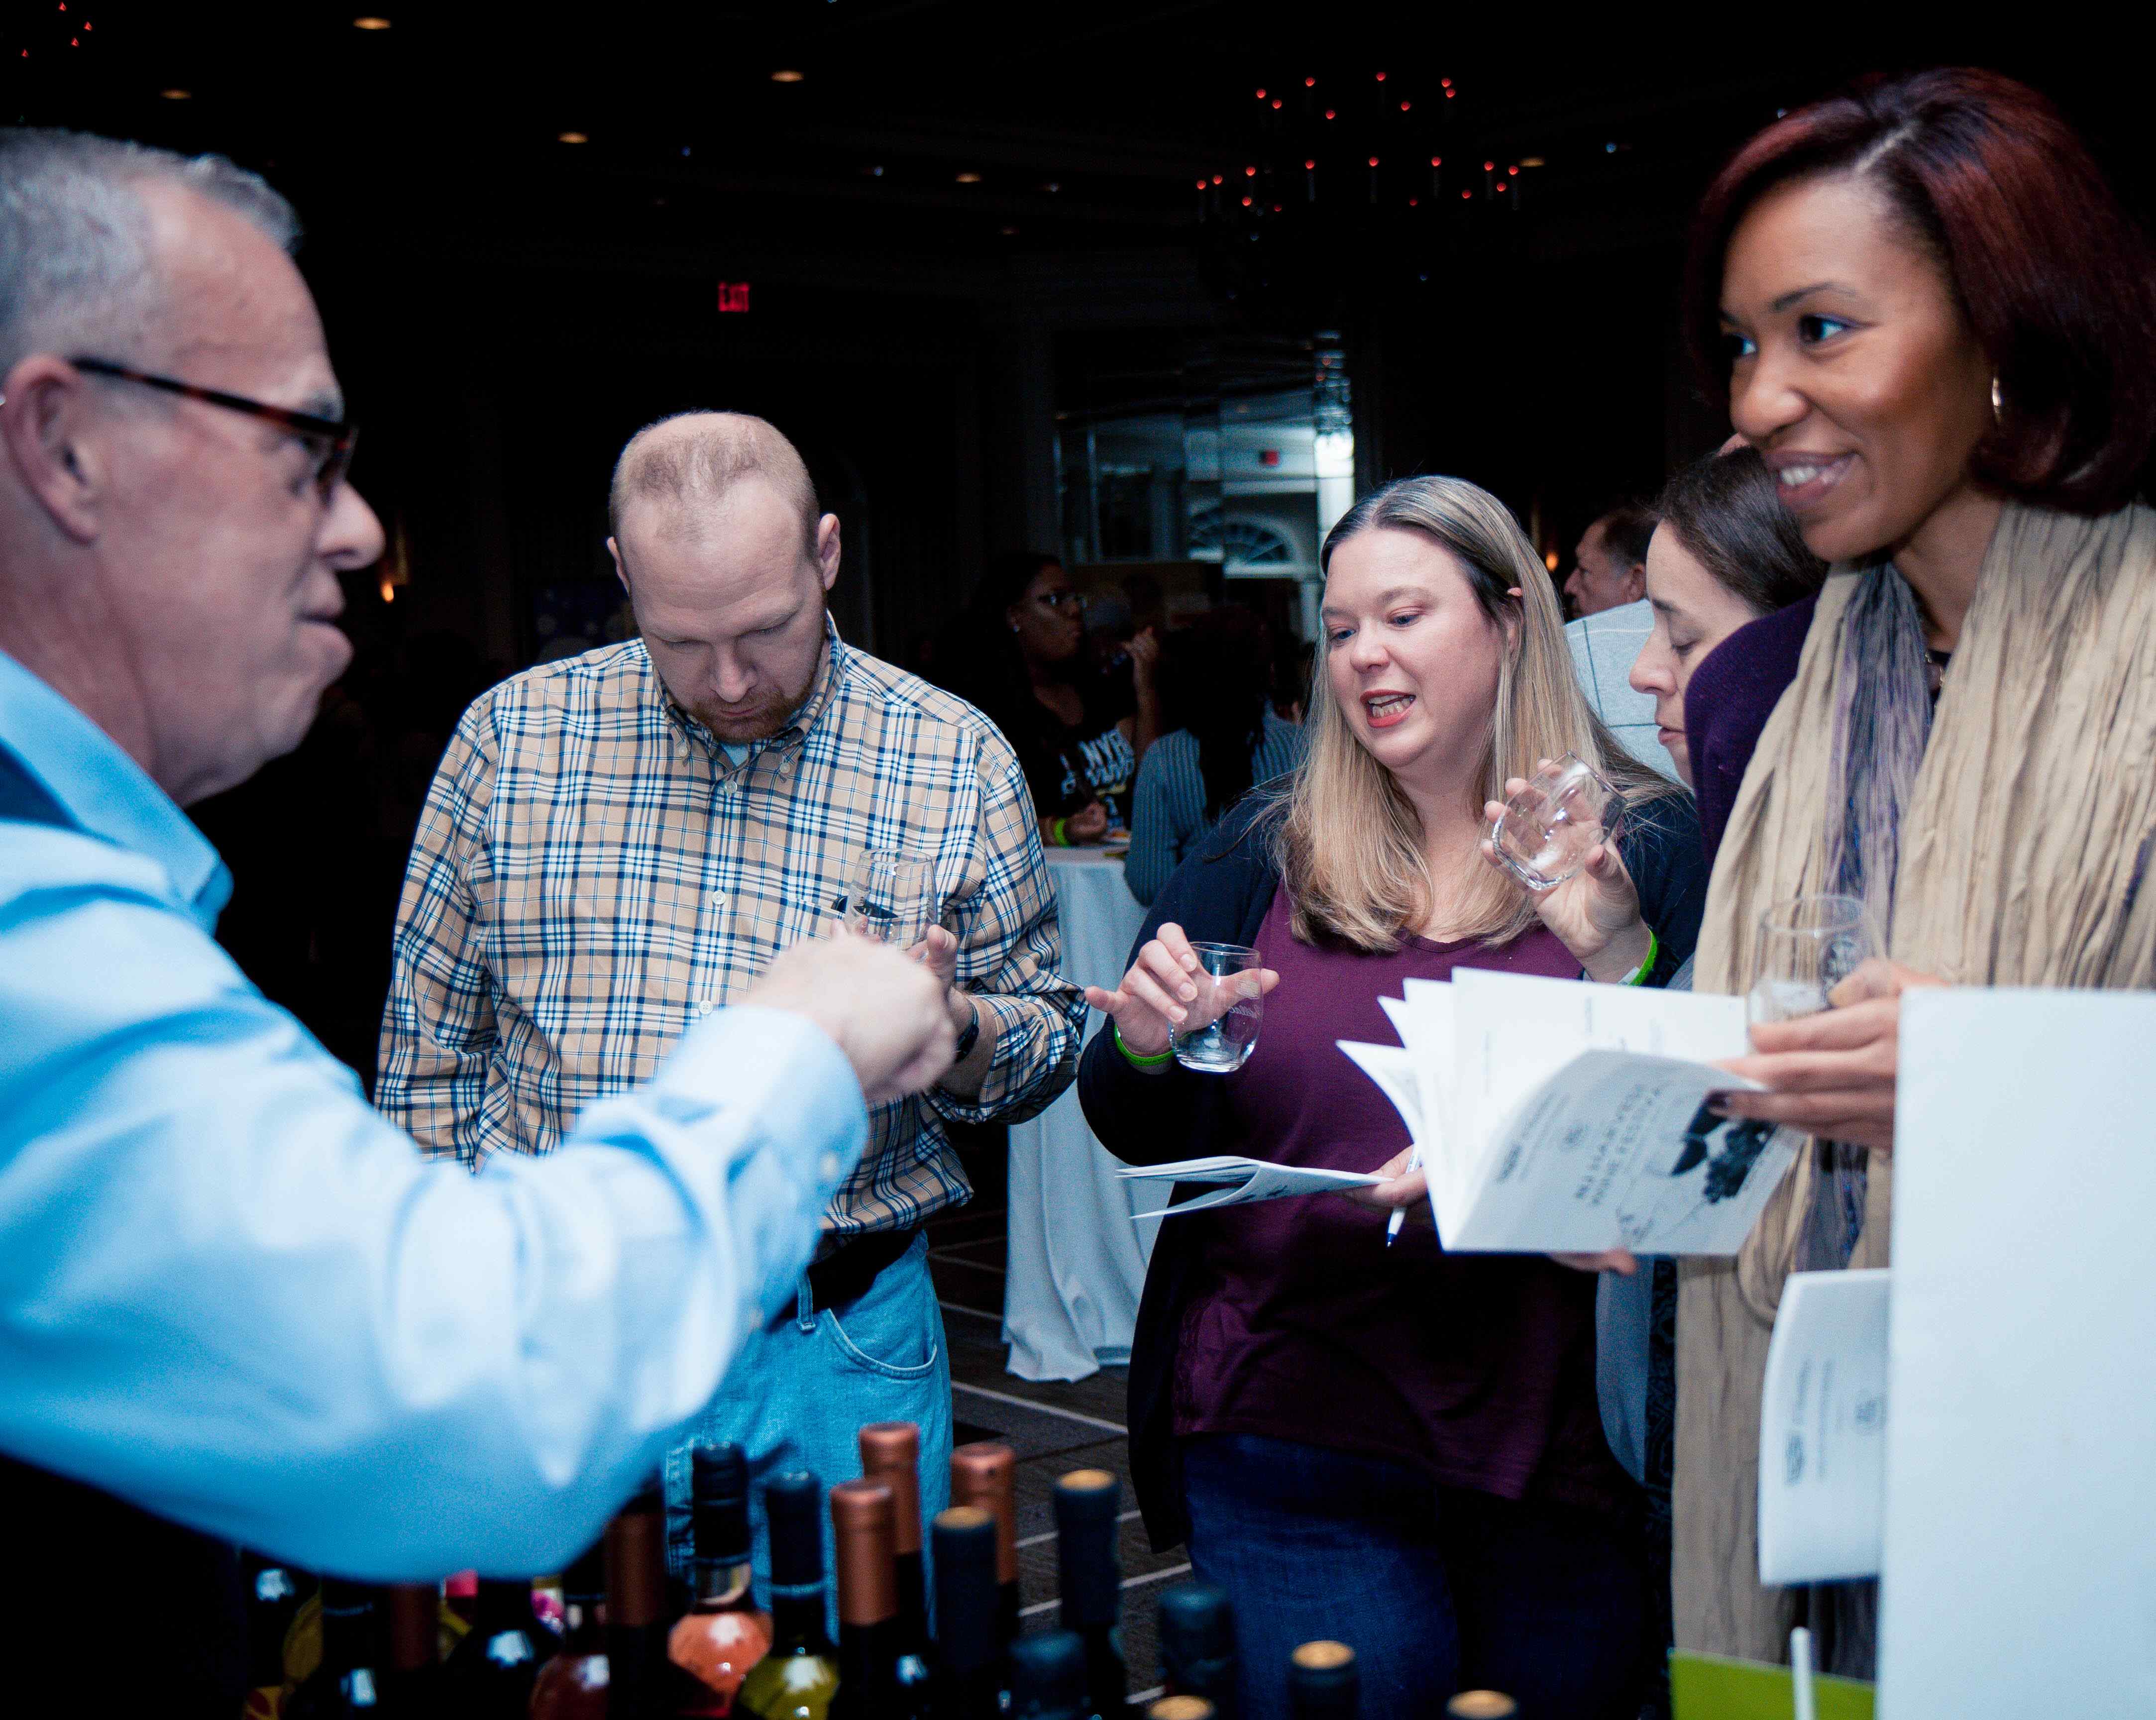 Wine, live jazz, light fare and artisanal foods take the chill out of winter as the annual New Jersey Winter Wine Fest returns to the Hilton Short Hills this February 24.